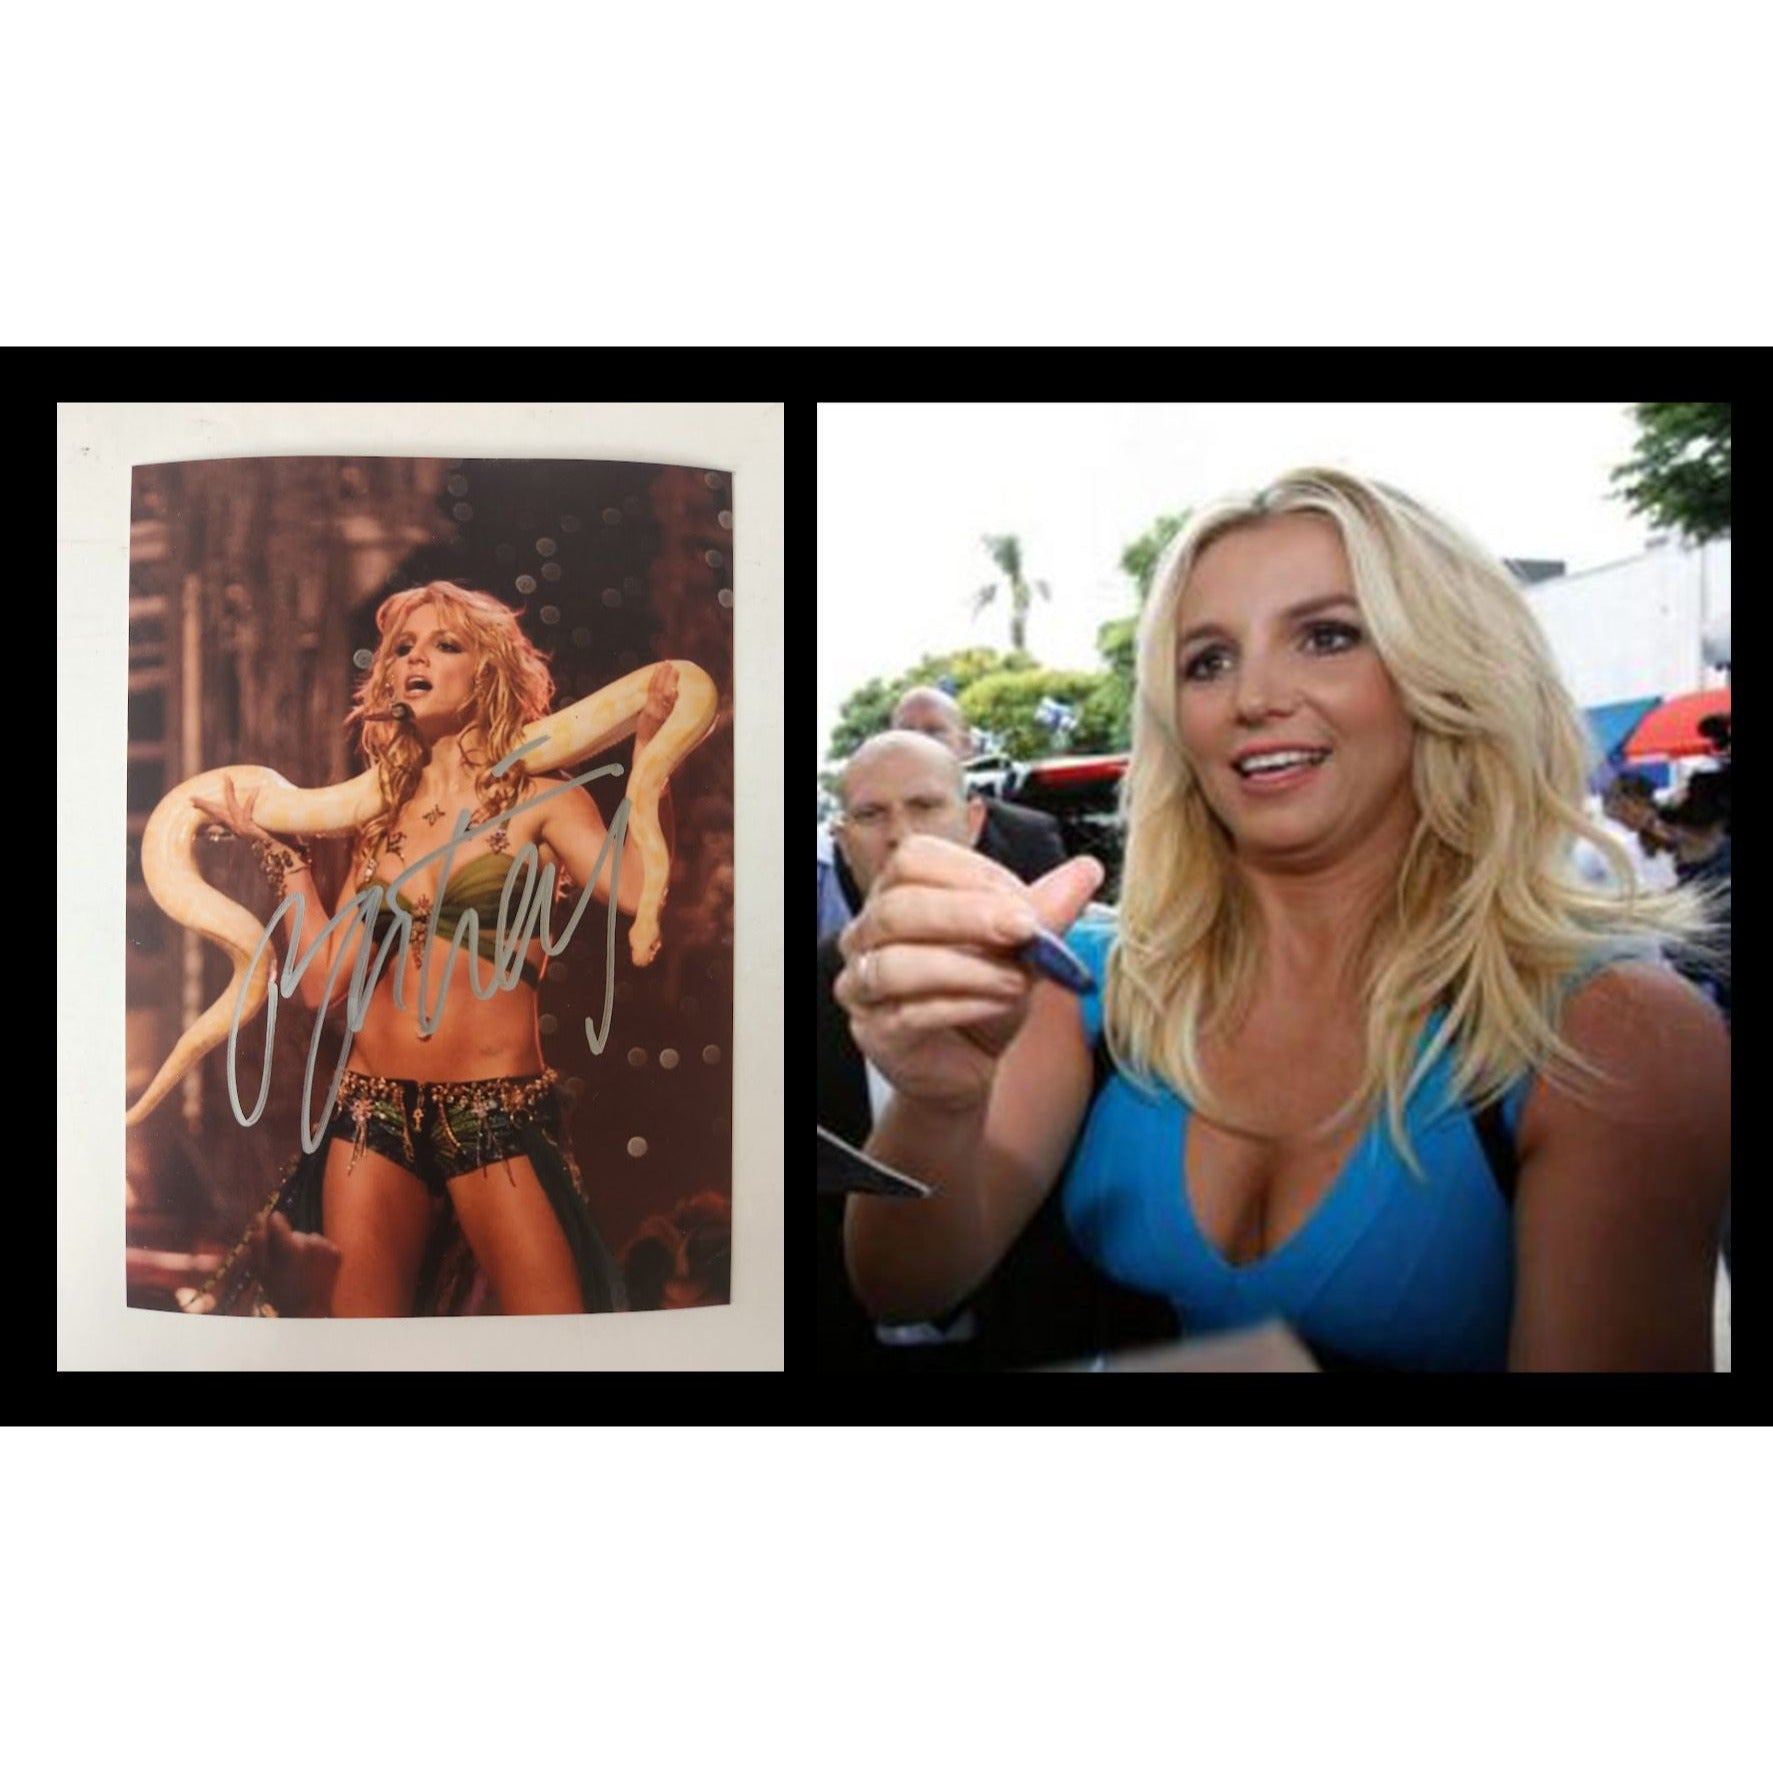 Britney Spears 5x7 photo signed with proof